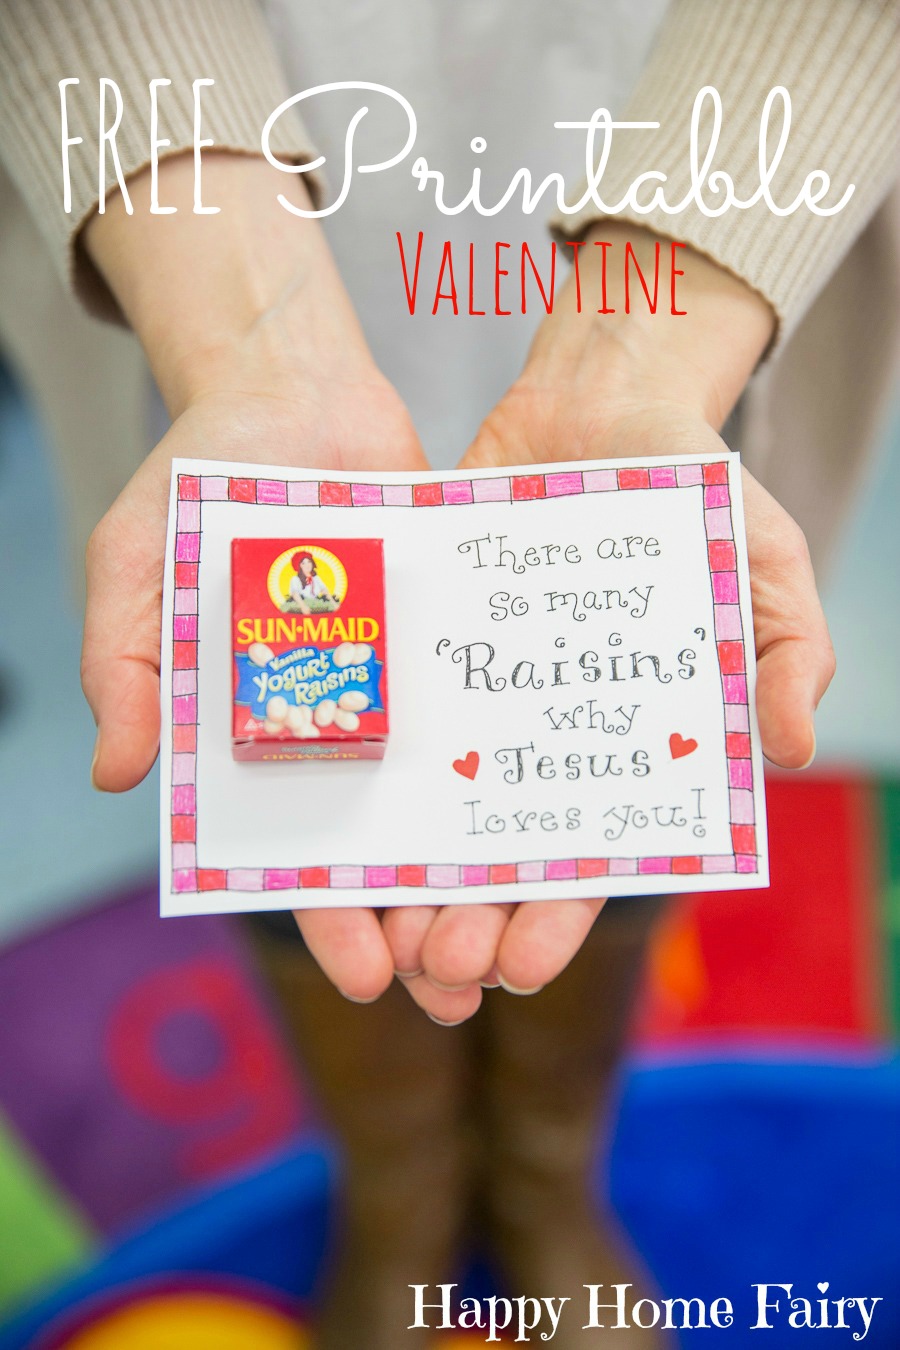 Adorable FREE Printable Valentine (and it's HEALTHY) - Happy Home Fairy